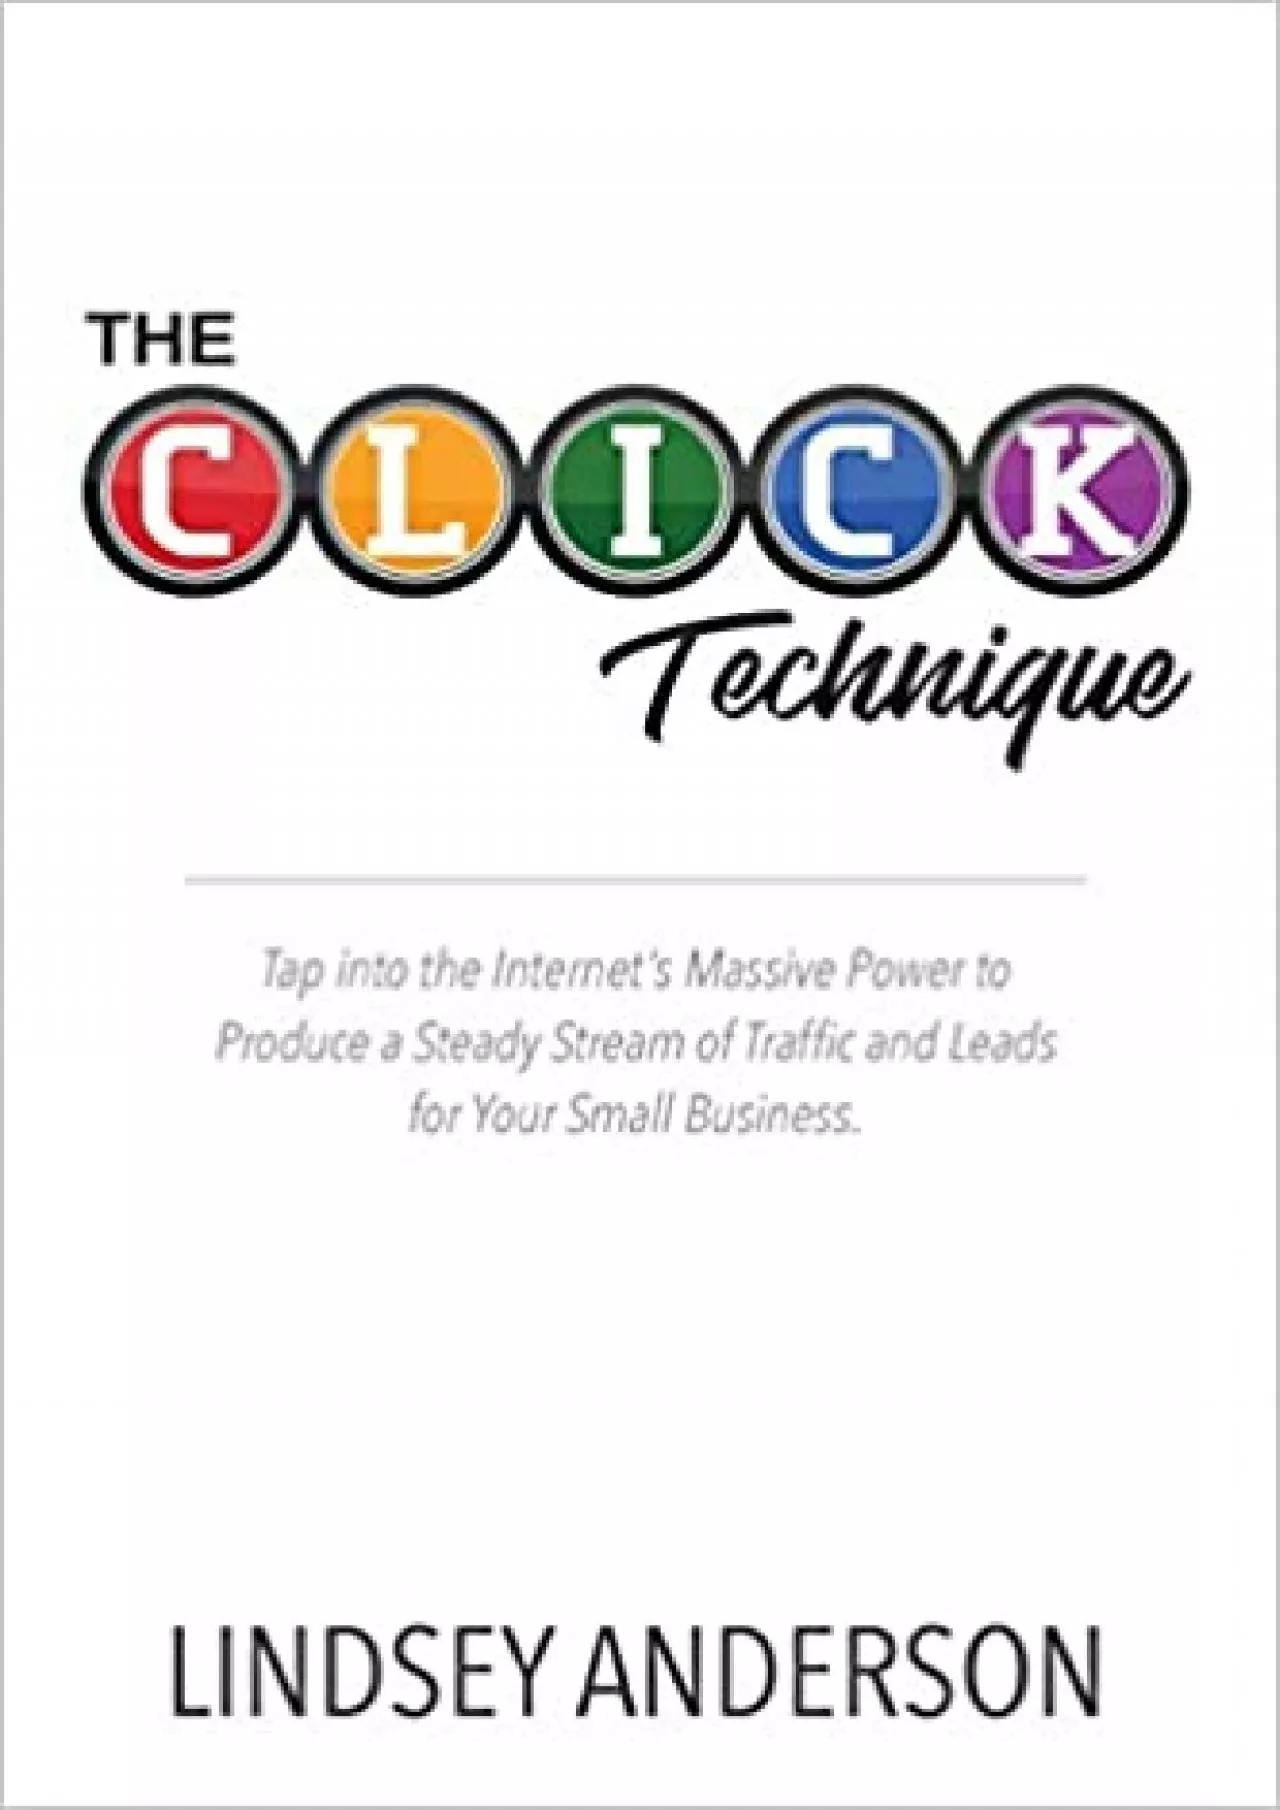 The CLICK Technique How to Drive an Endless Supply of Online Traffic and Leads to Your